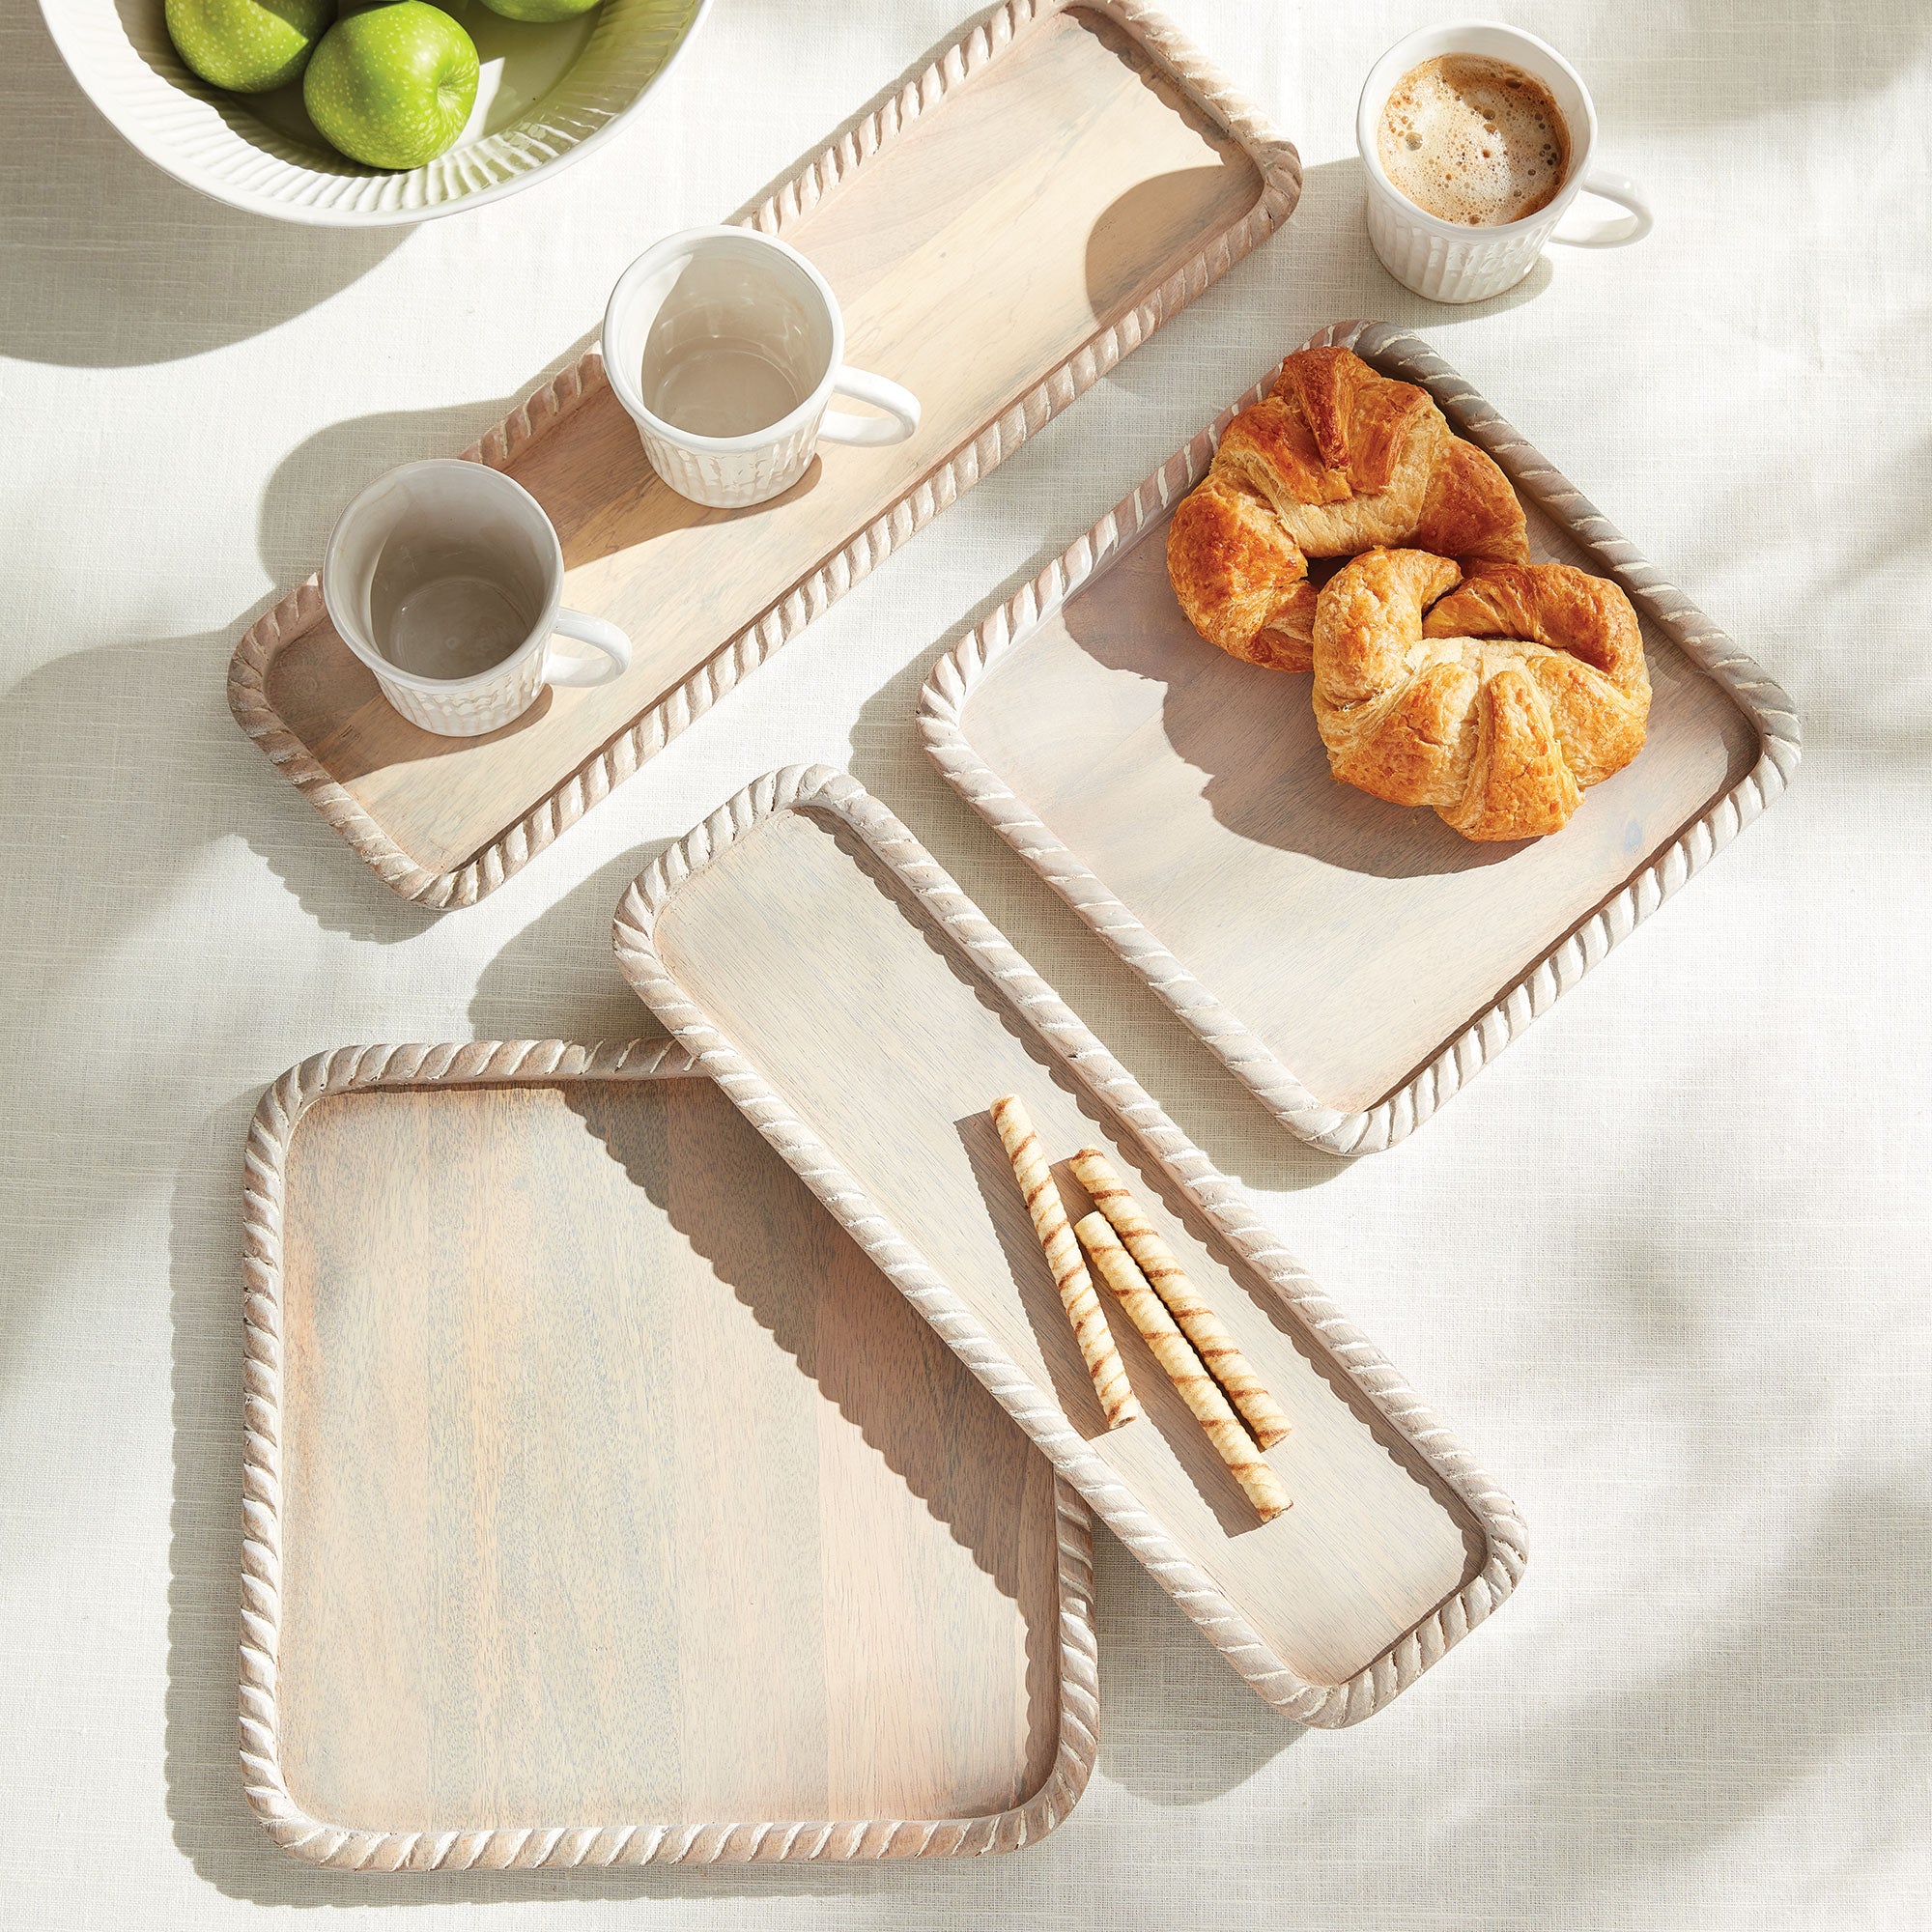 Hand carved from mango wood, this pair of trays is a sweet little accent for baked goods or a cheese tray. A little touch of natural wood tone is always on trend. Amethyst Home provides interior design, new construction, custom furniture, and area rugs in the Winter Garden metro area.